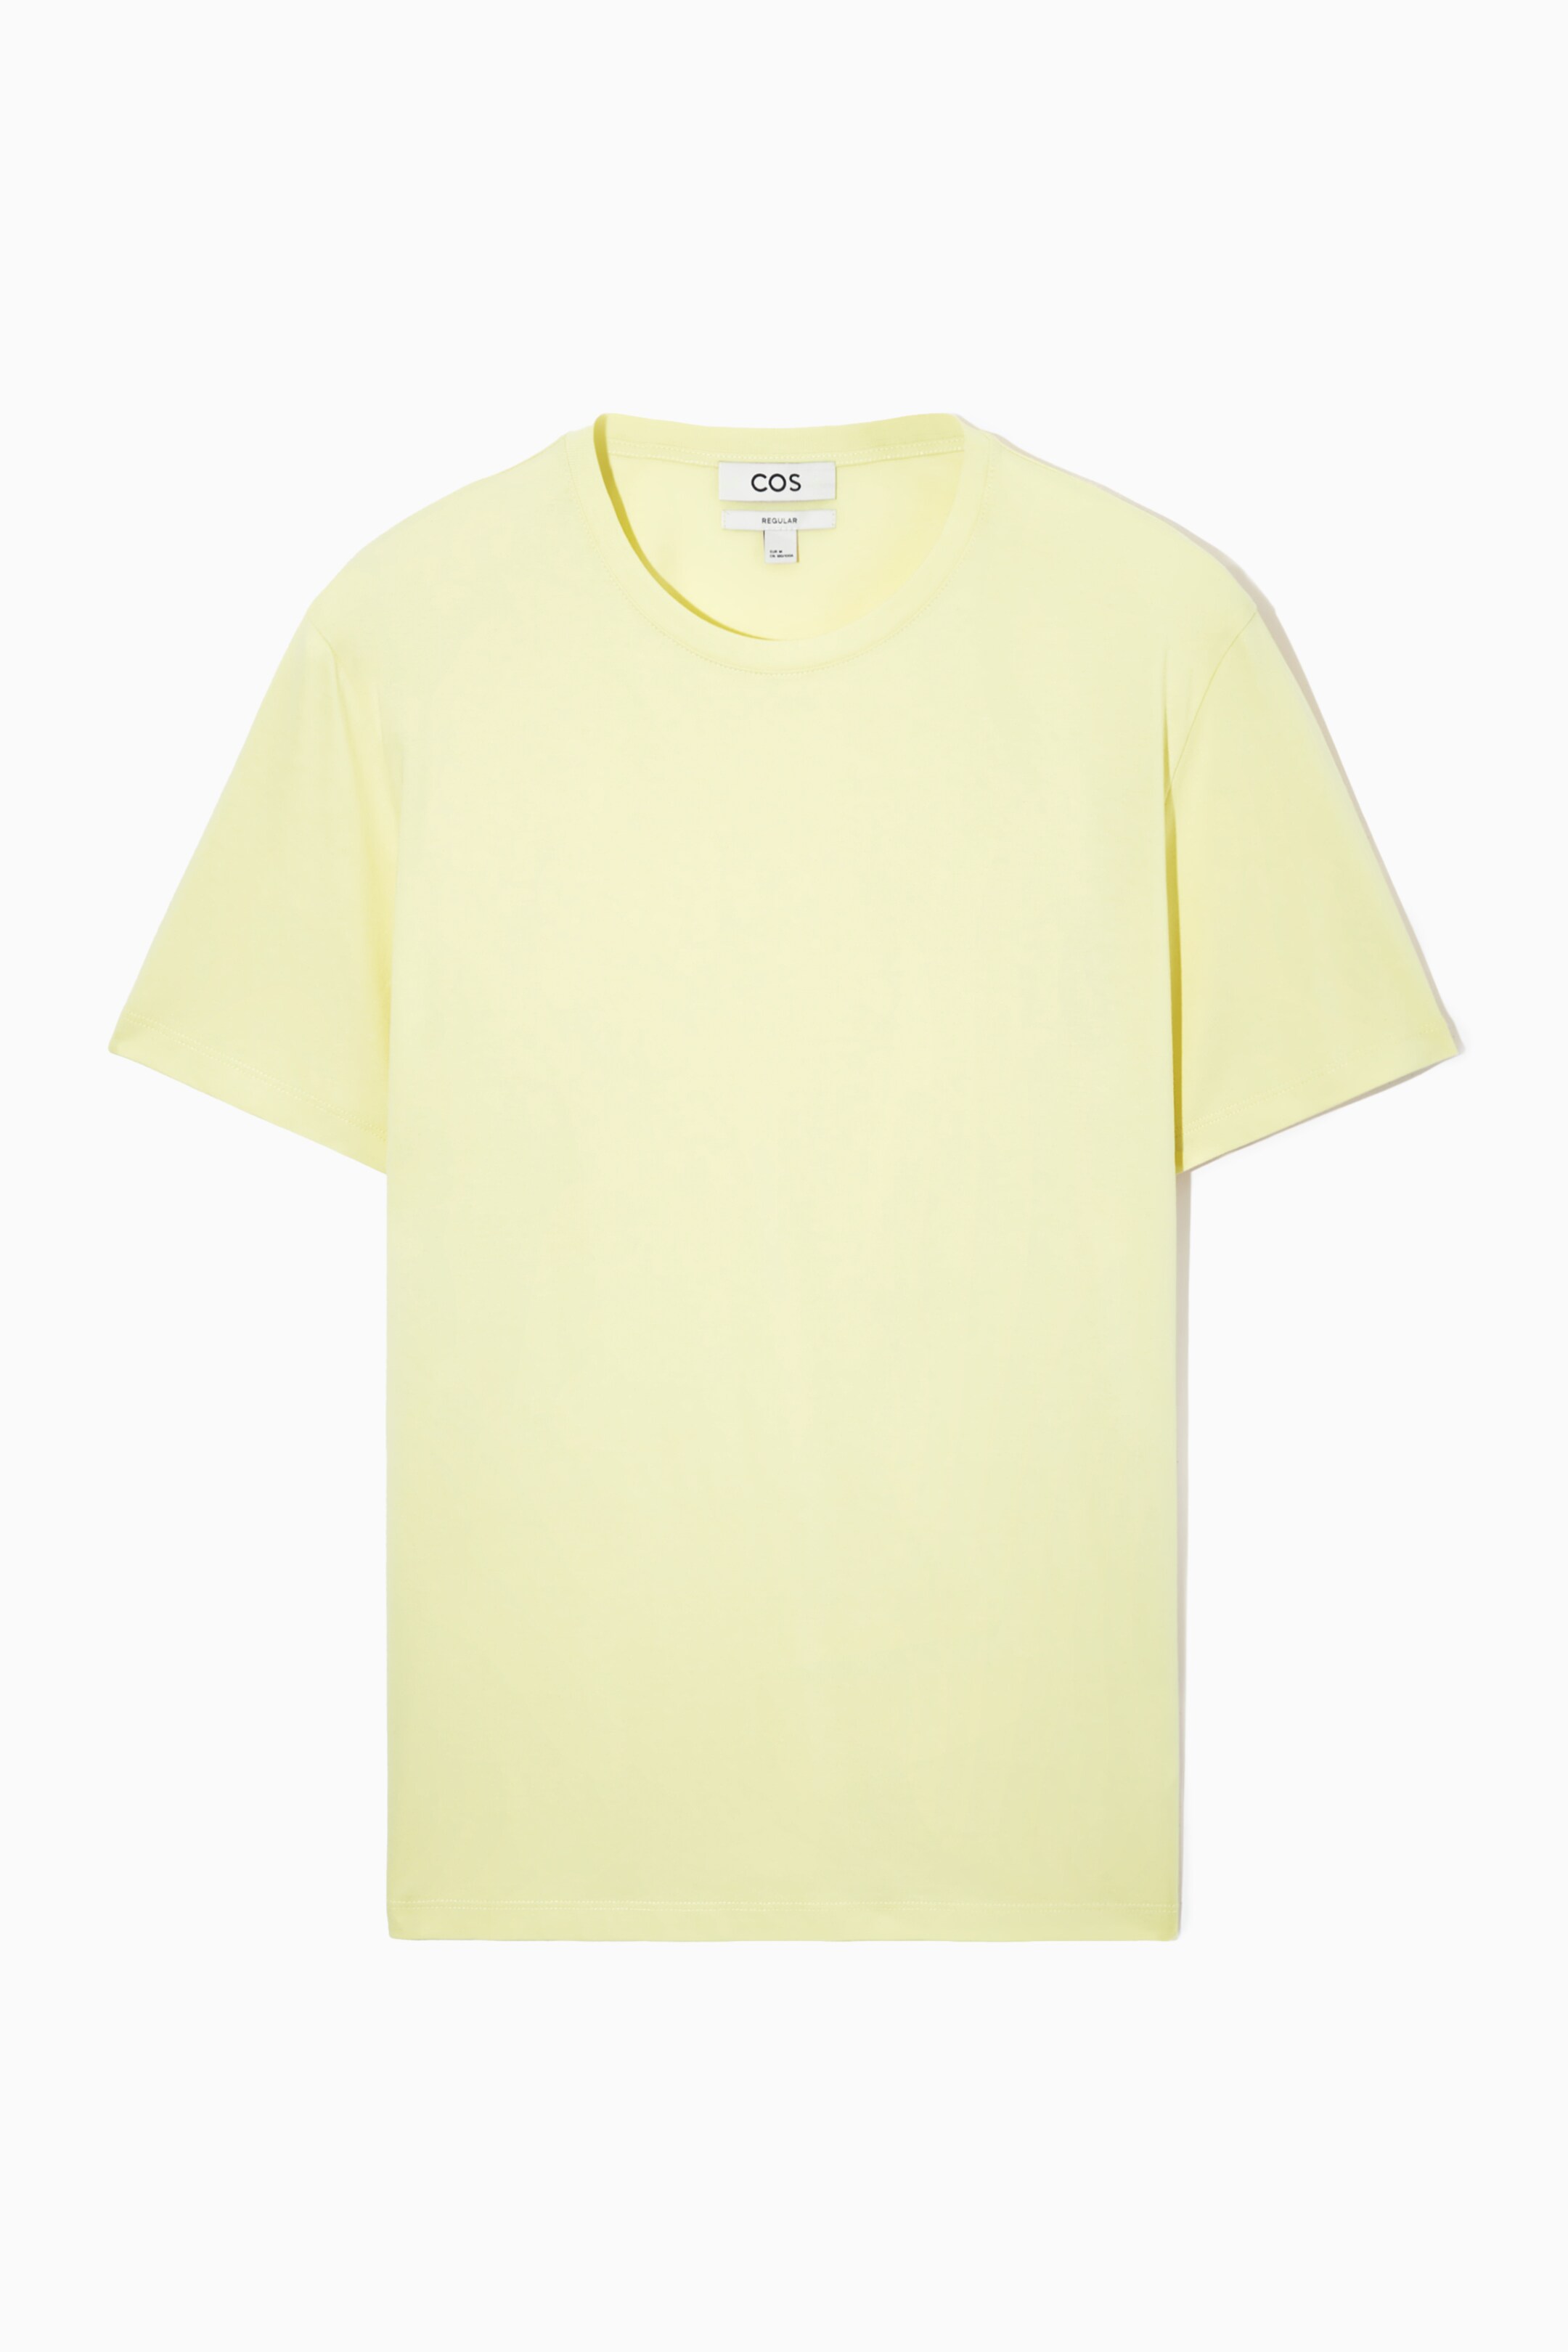 Front image of cos THE EXTRA FINE T-SHIRT in YELLOW